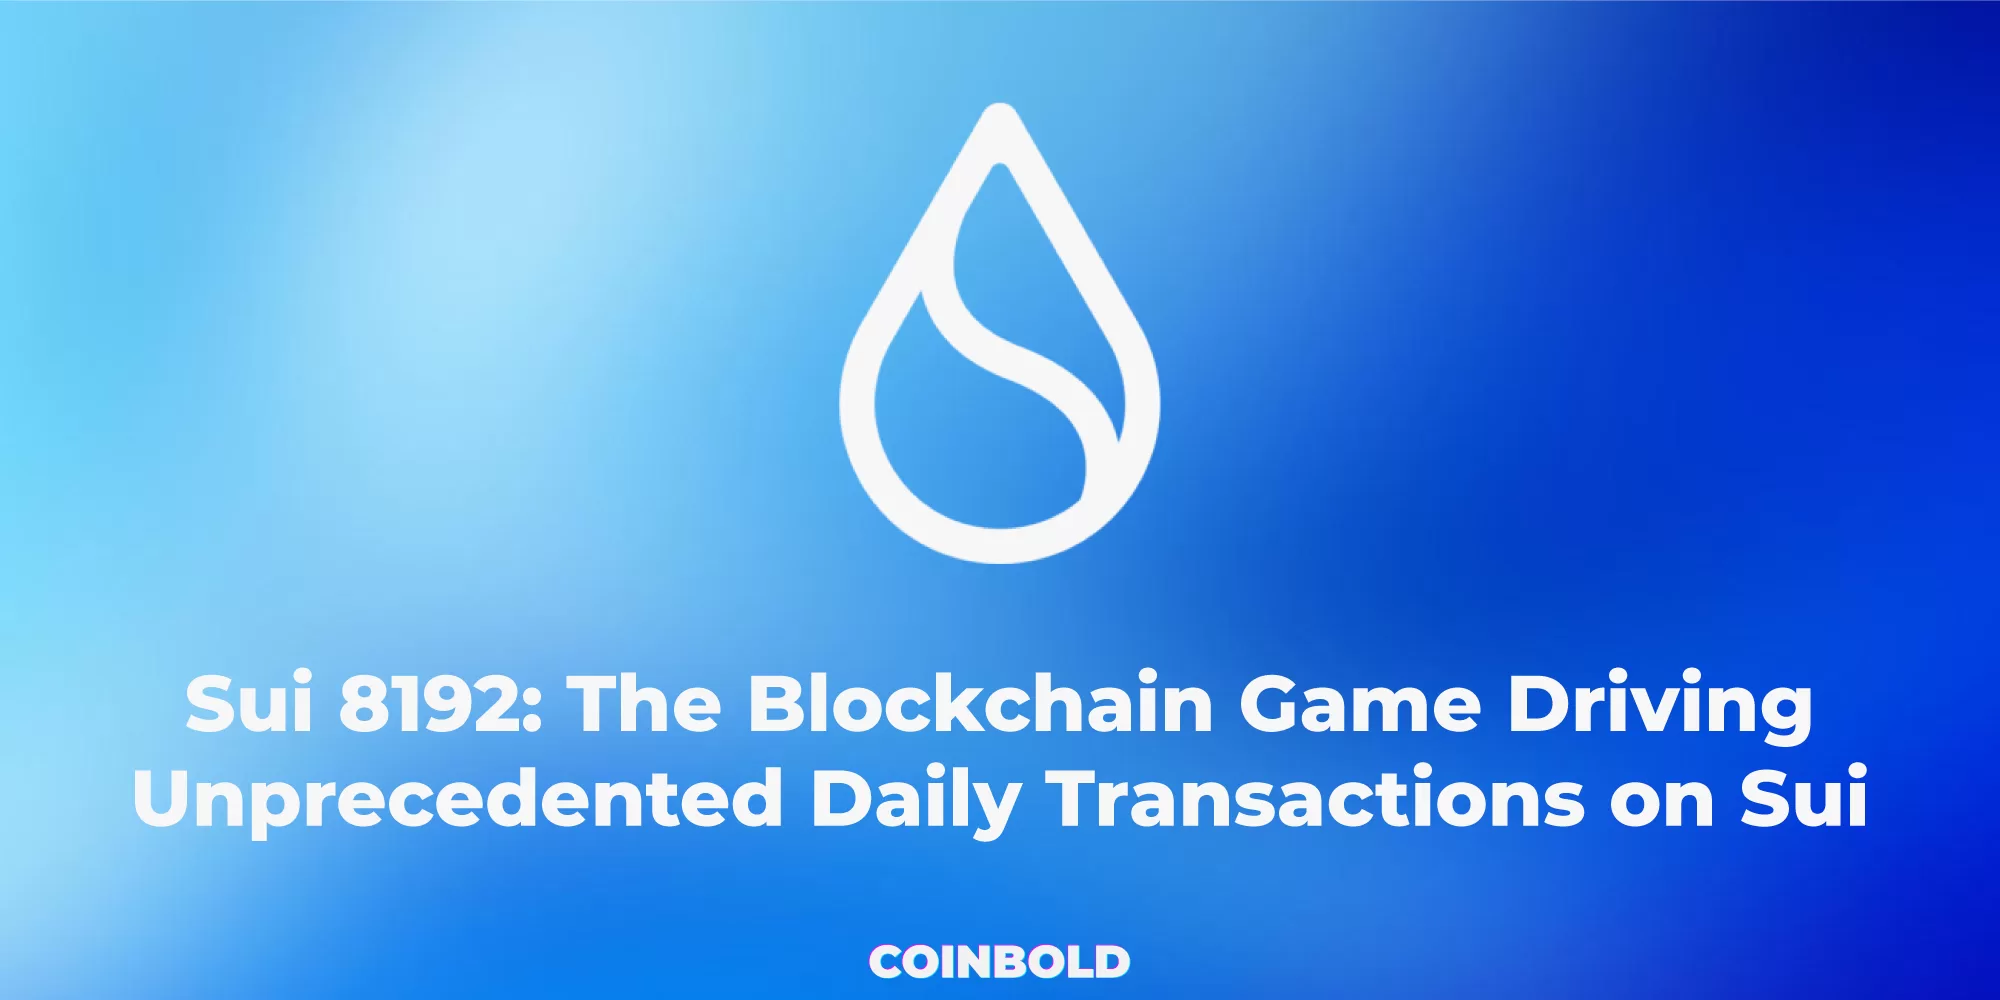 Sui 8192: The Blockchain Game Driving Unprecedented Daily Transactions on Sui Network